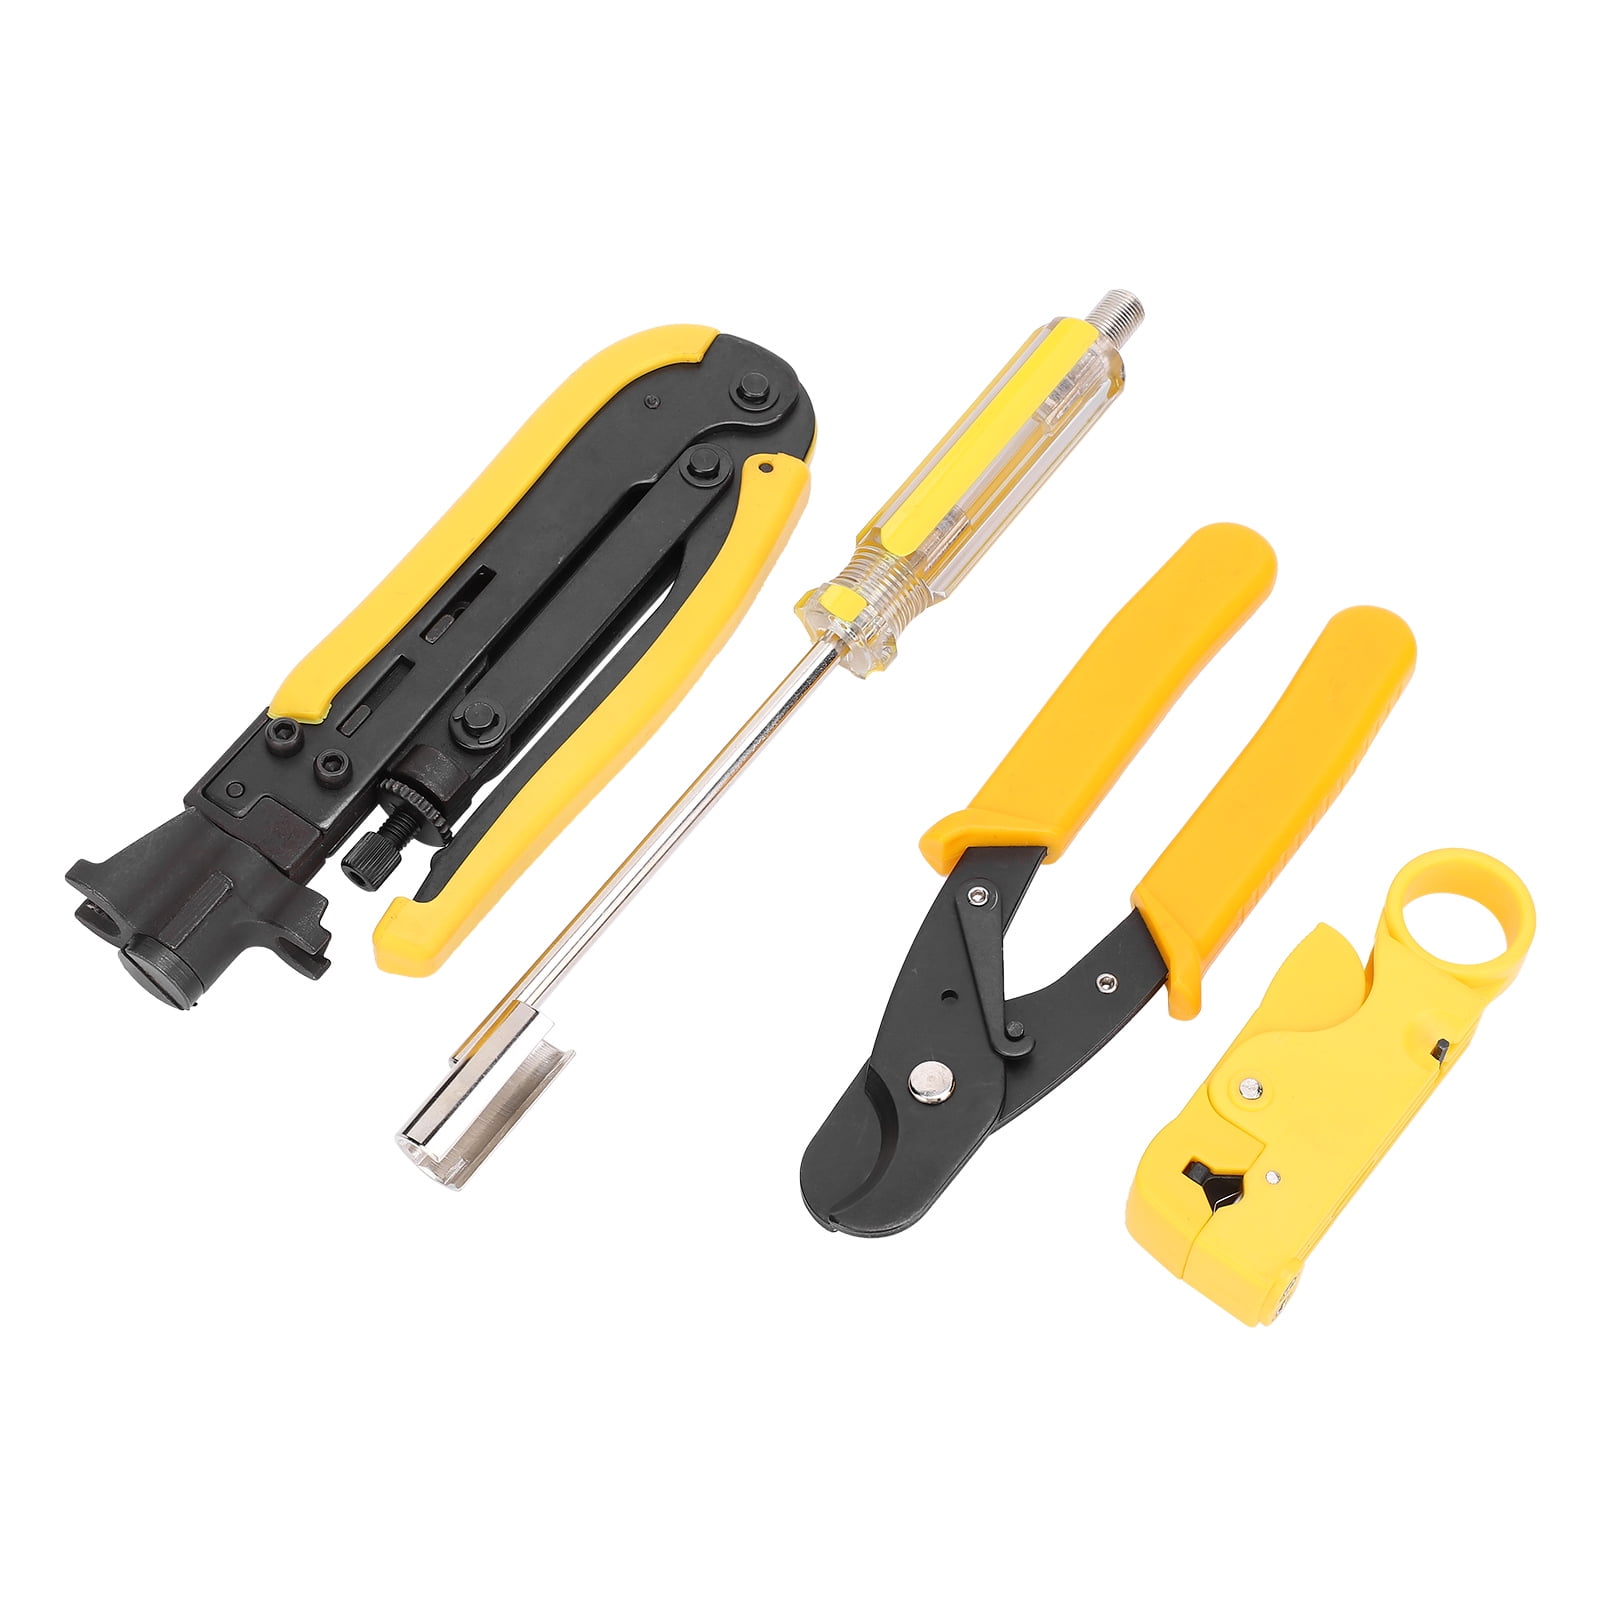 Rotary Coaxial Stripping Cable Stripper Cutter Tool For RG-58/59/62/6QS/3C/4R.fi 